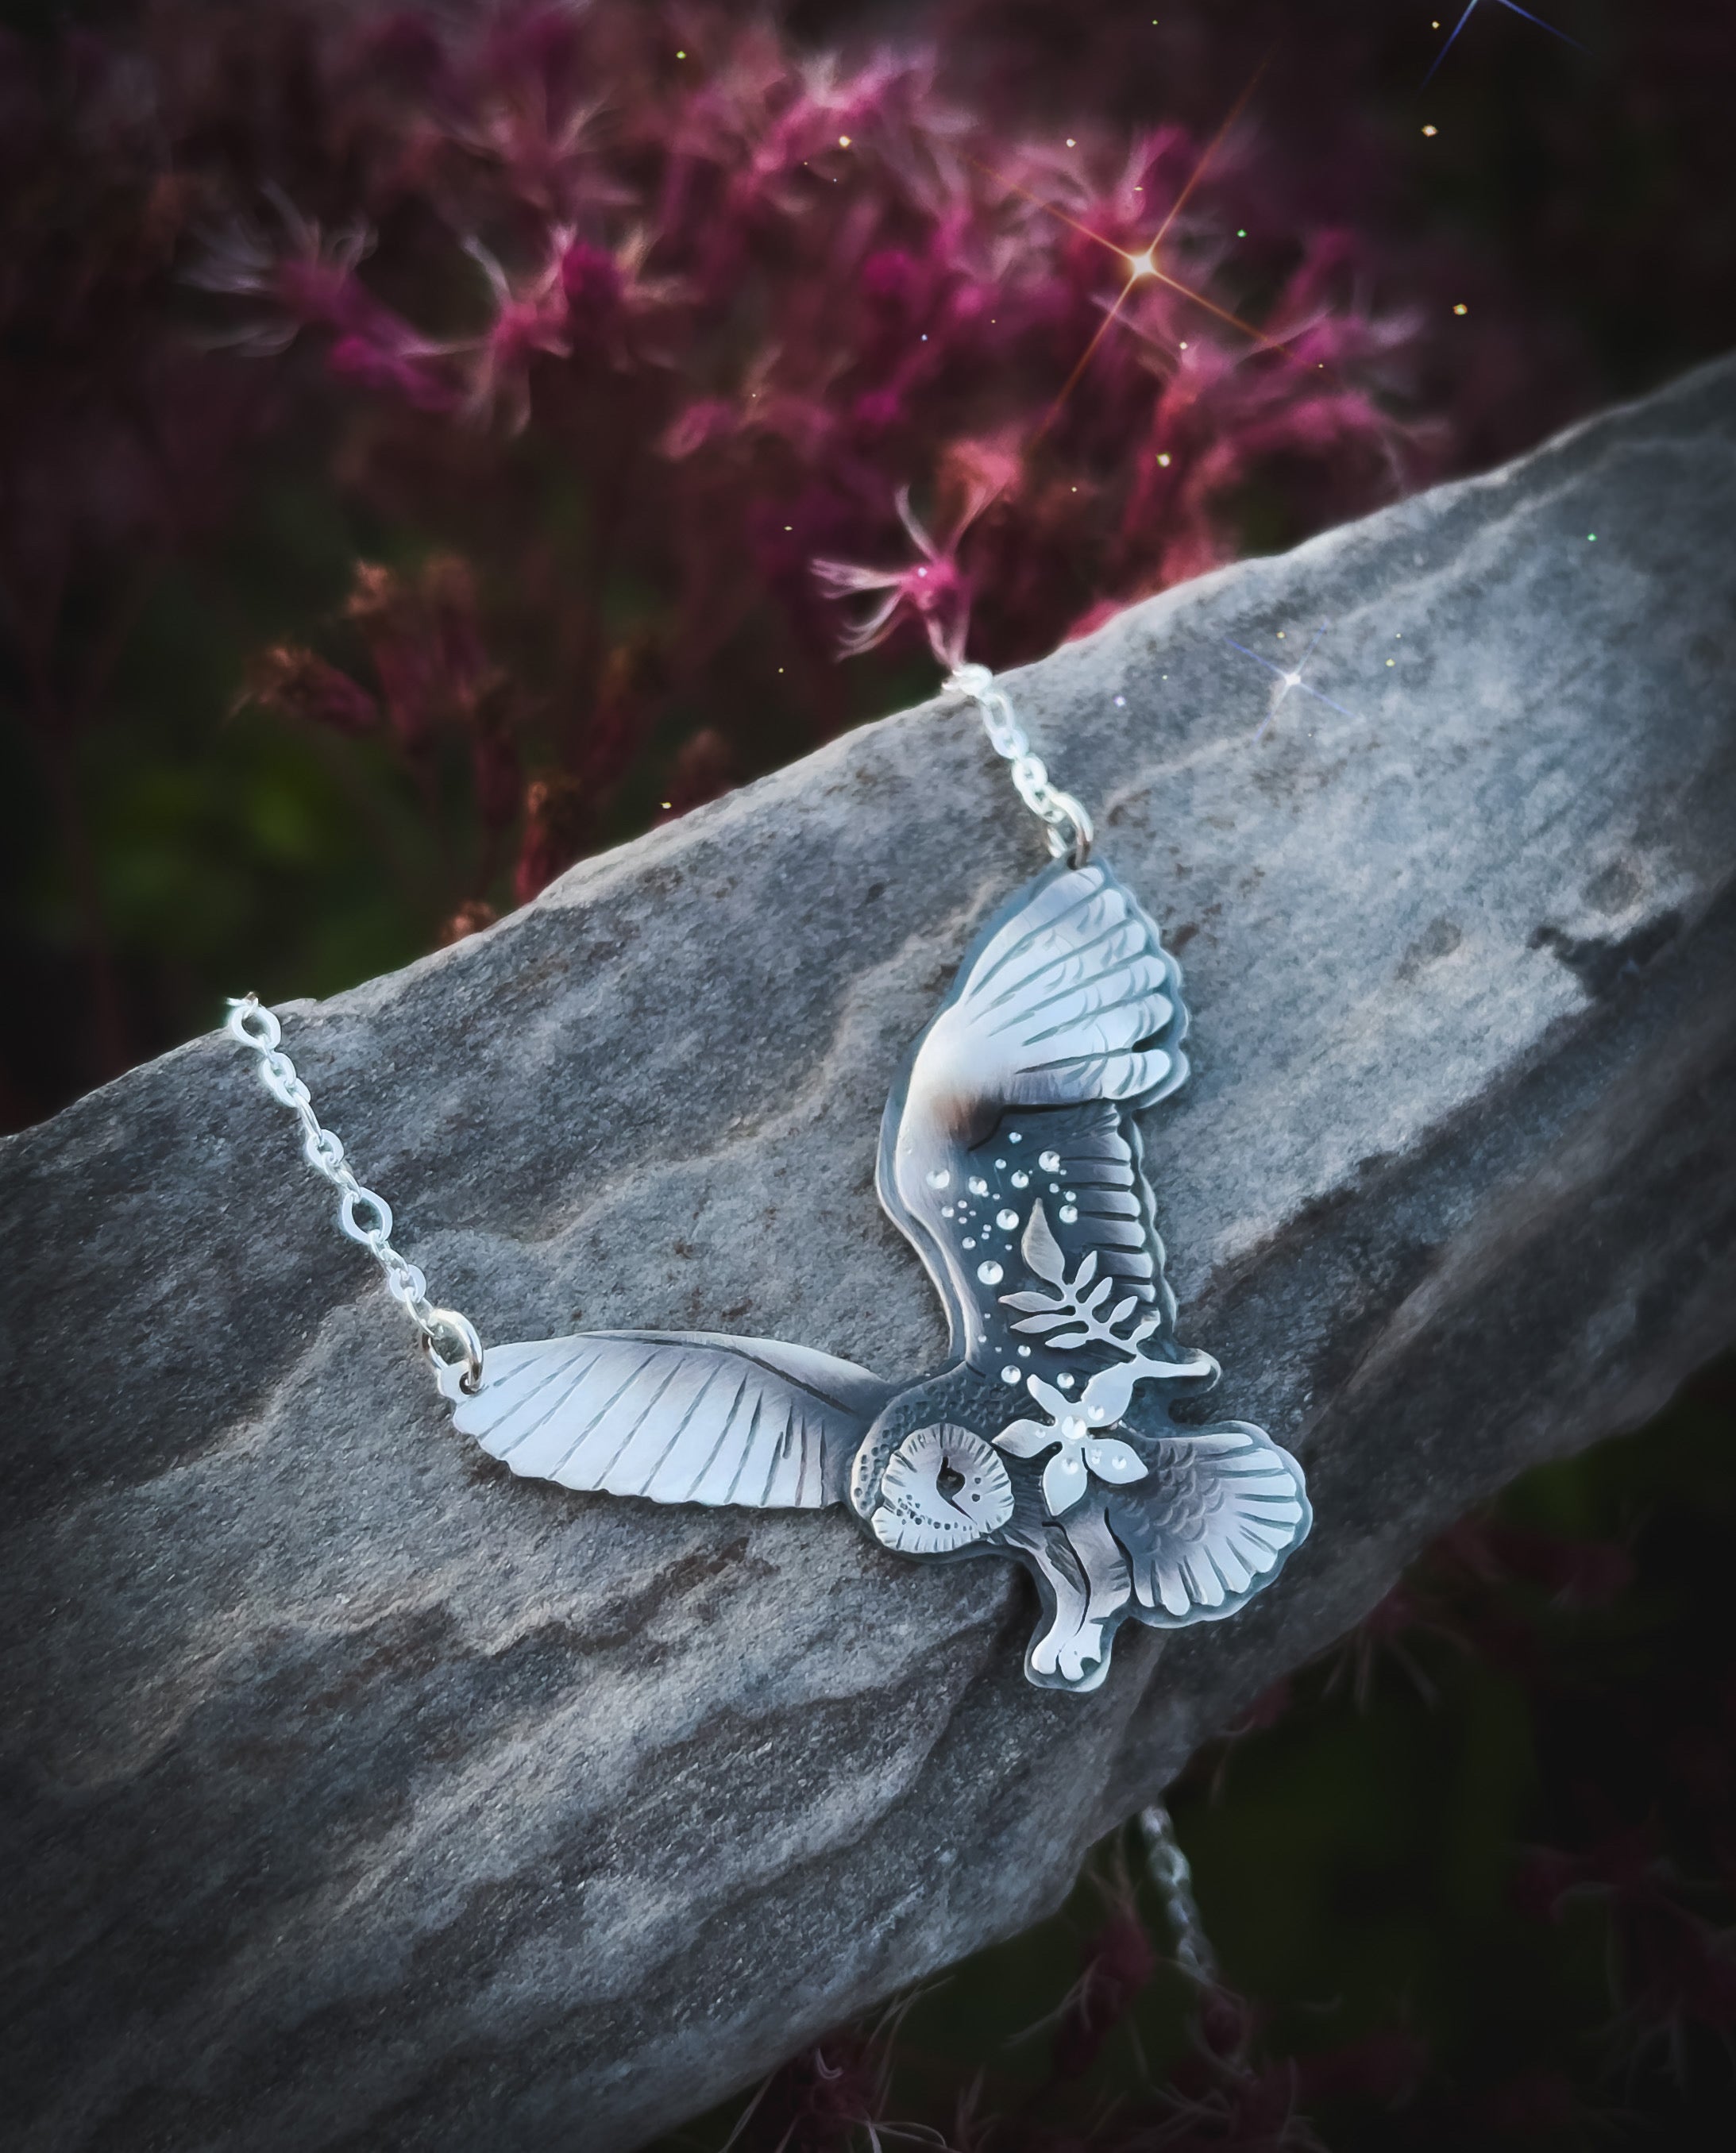 The Small Barn Owl Necklace - Totem Owl Necklace